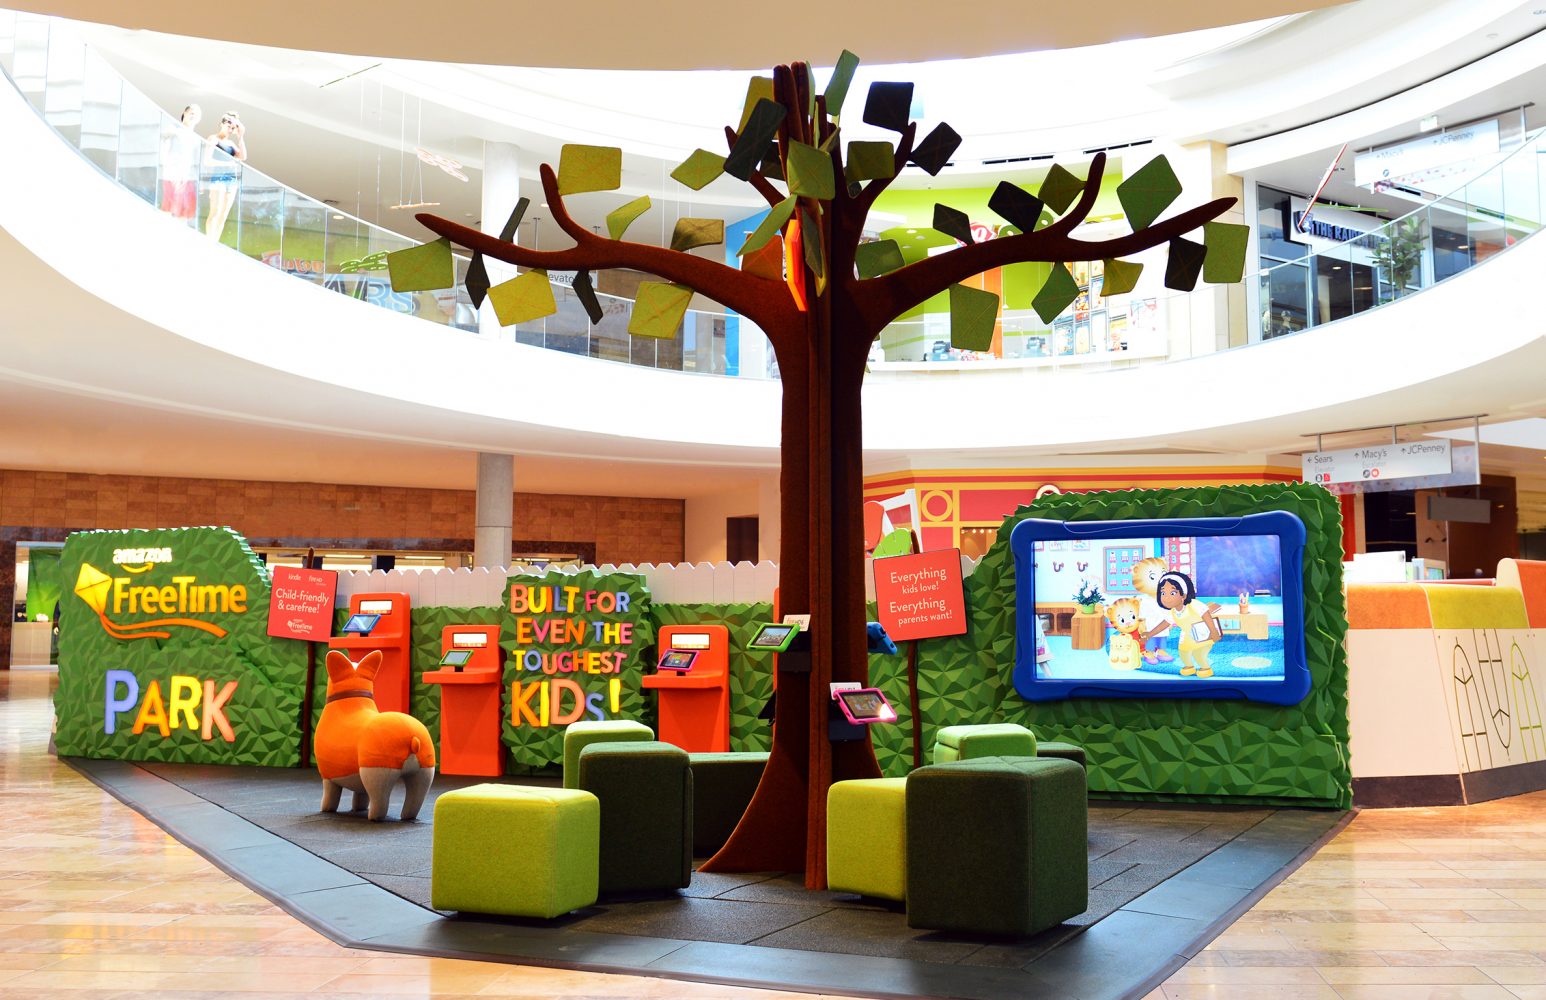 Kid-focused ‘digital play park’ experience for Amazon, Retail Experience Design by Household.